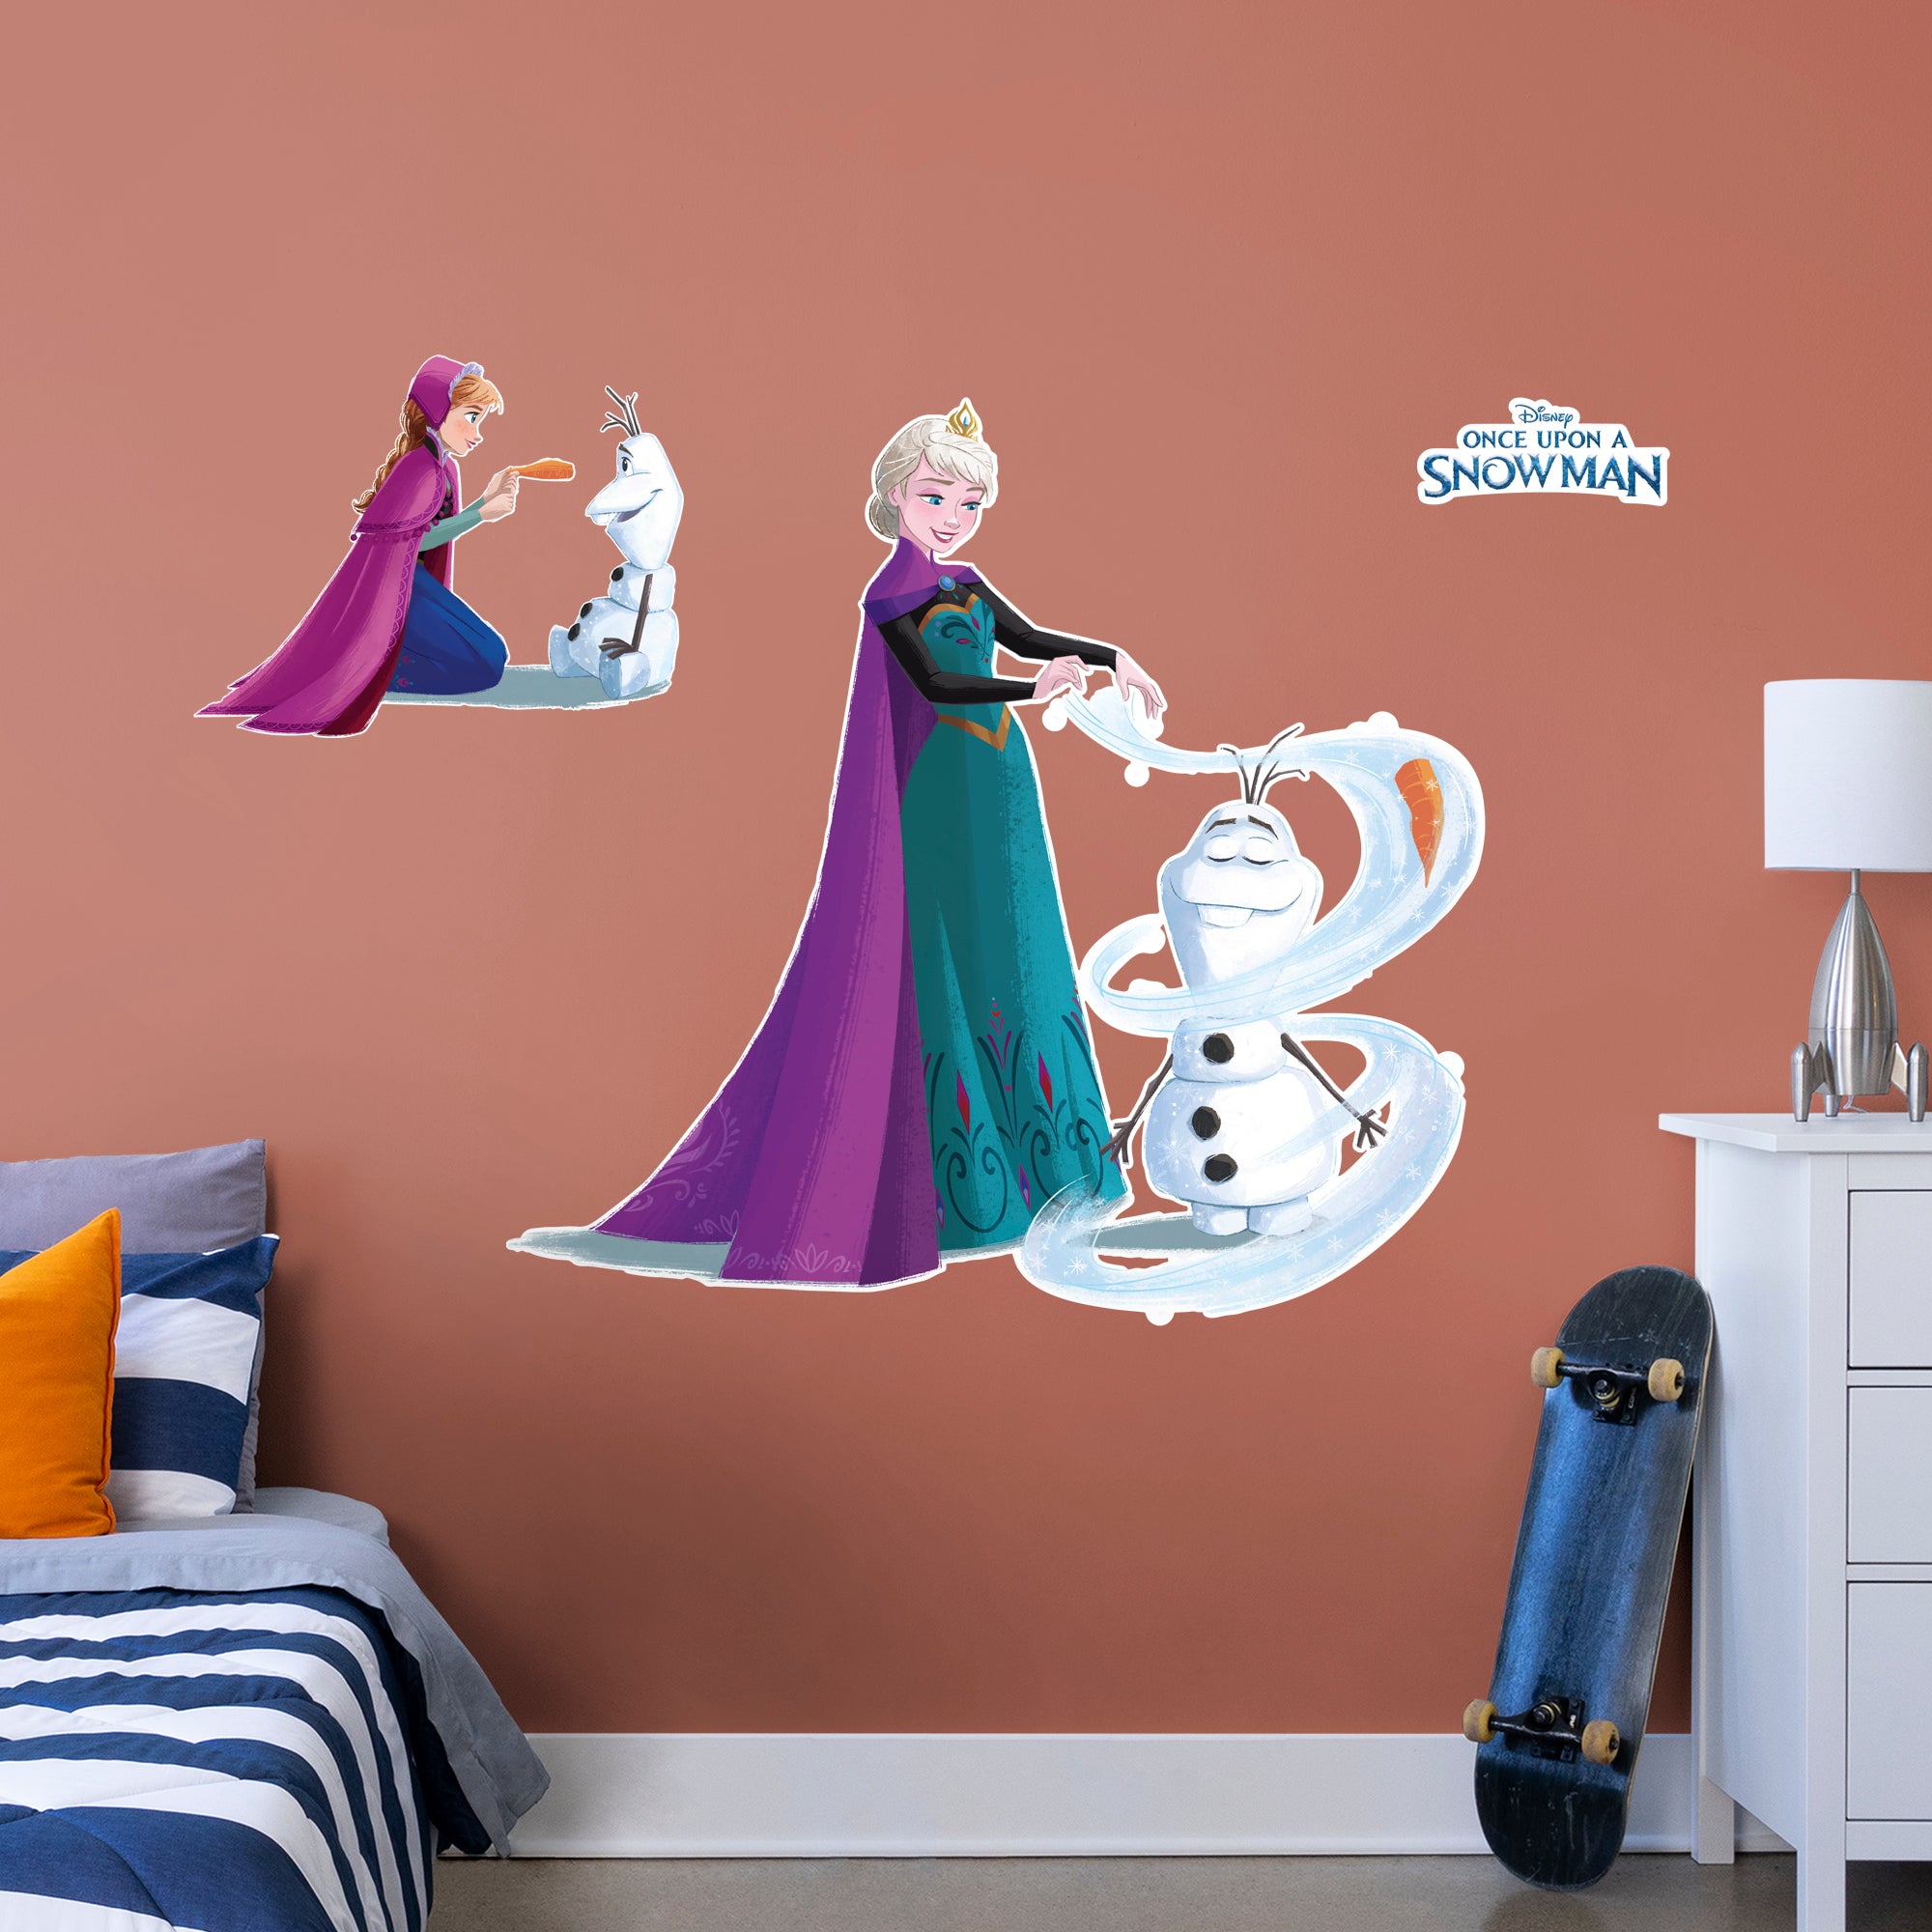 Olaf & Elsa: Frozen - Once Upon A Snowman - Officially Licensed Disney Removable Wall Decal Life-Size Character + 2 Decals by Fa